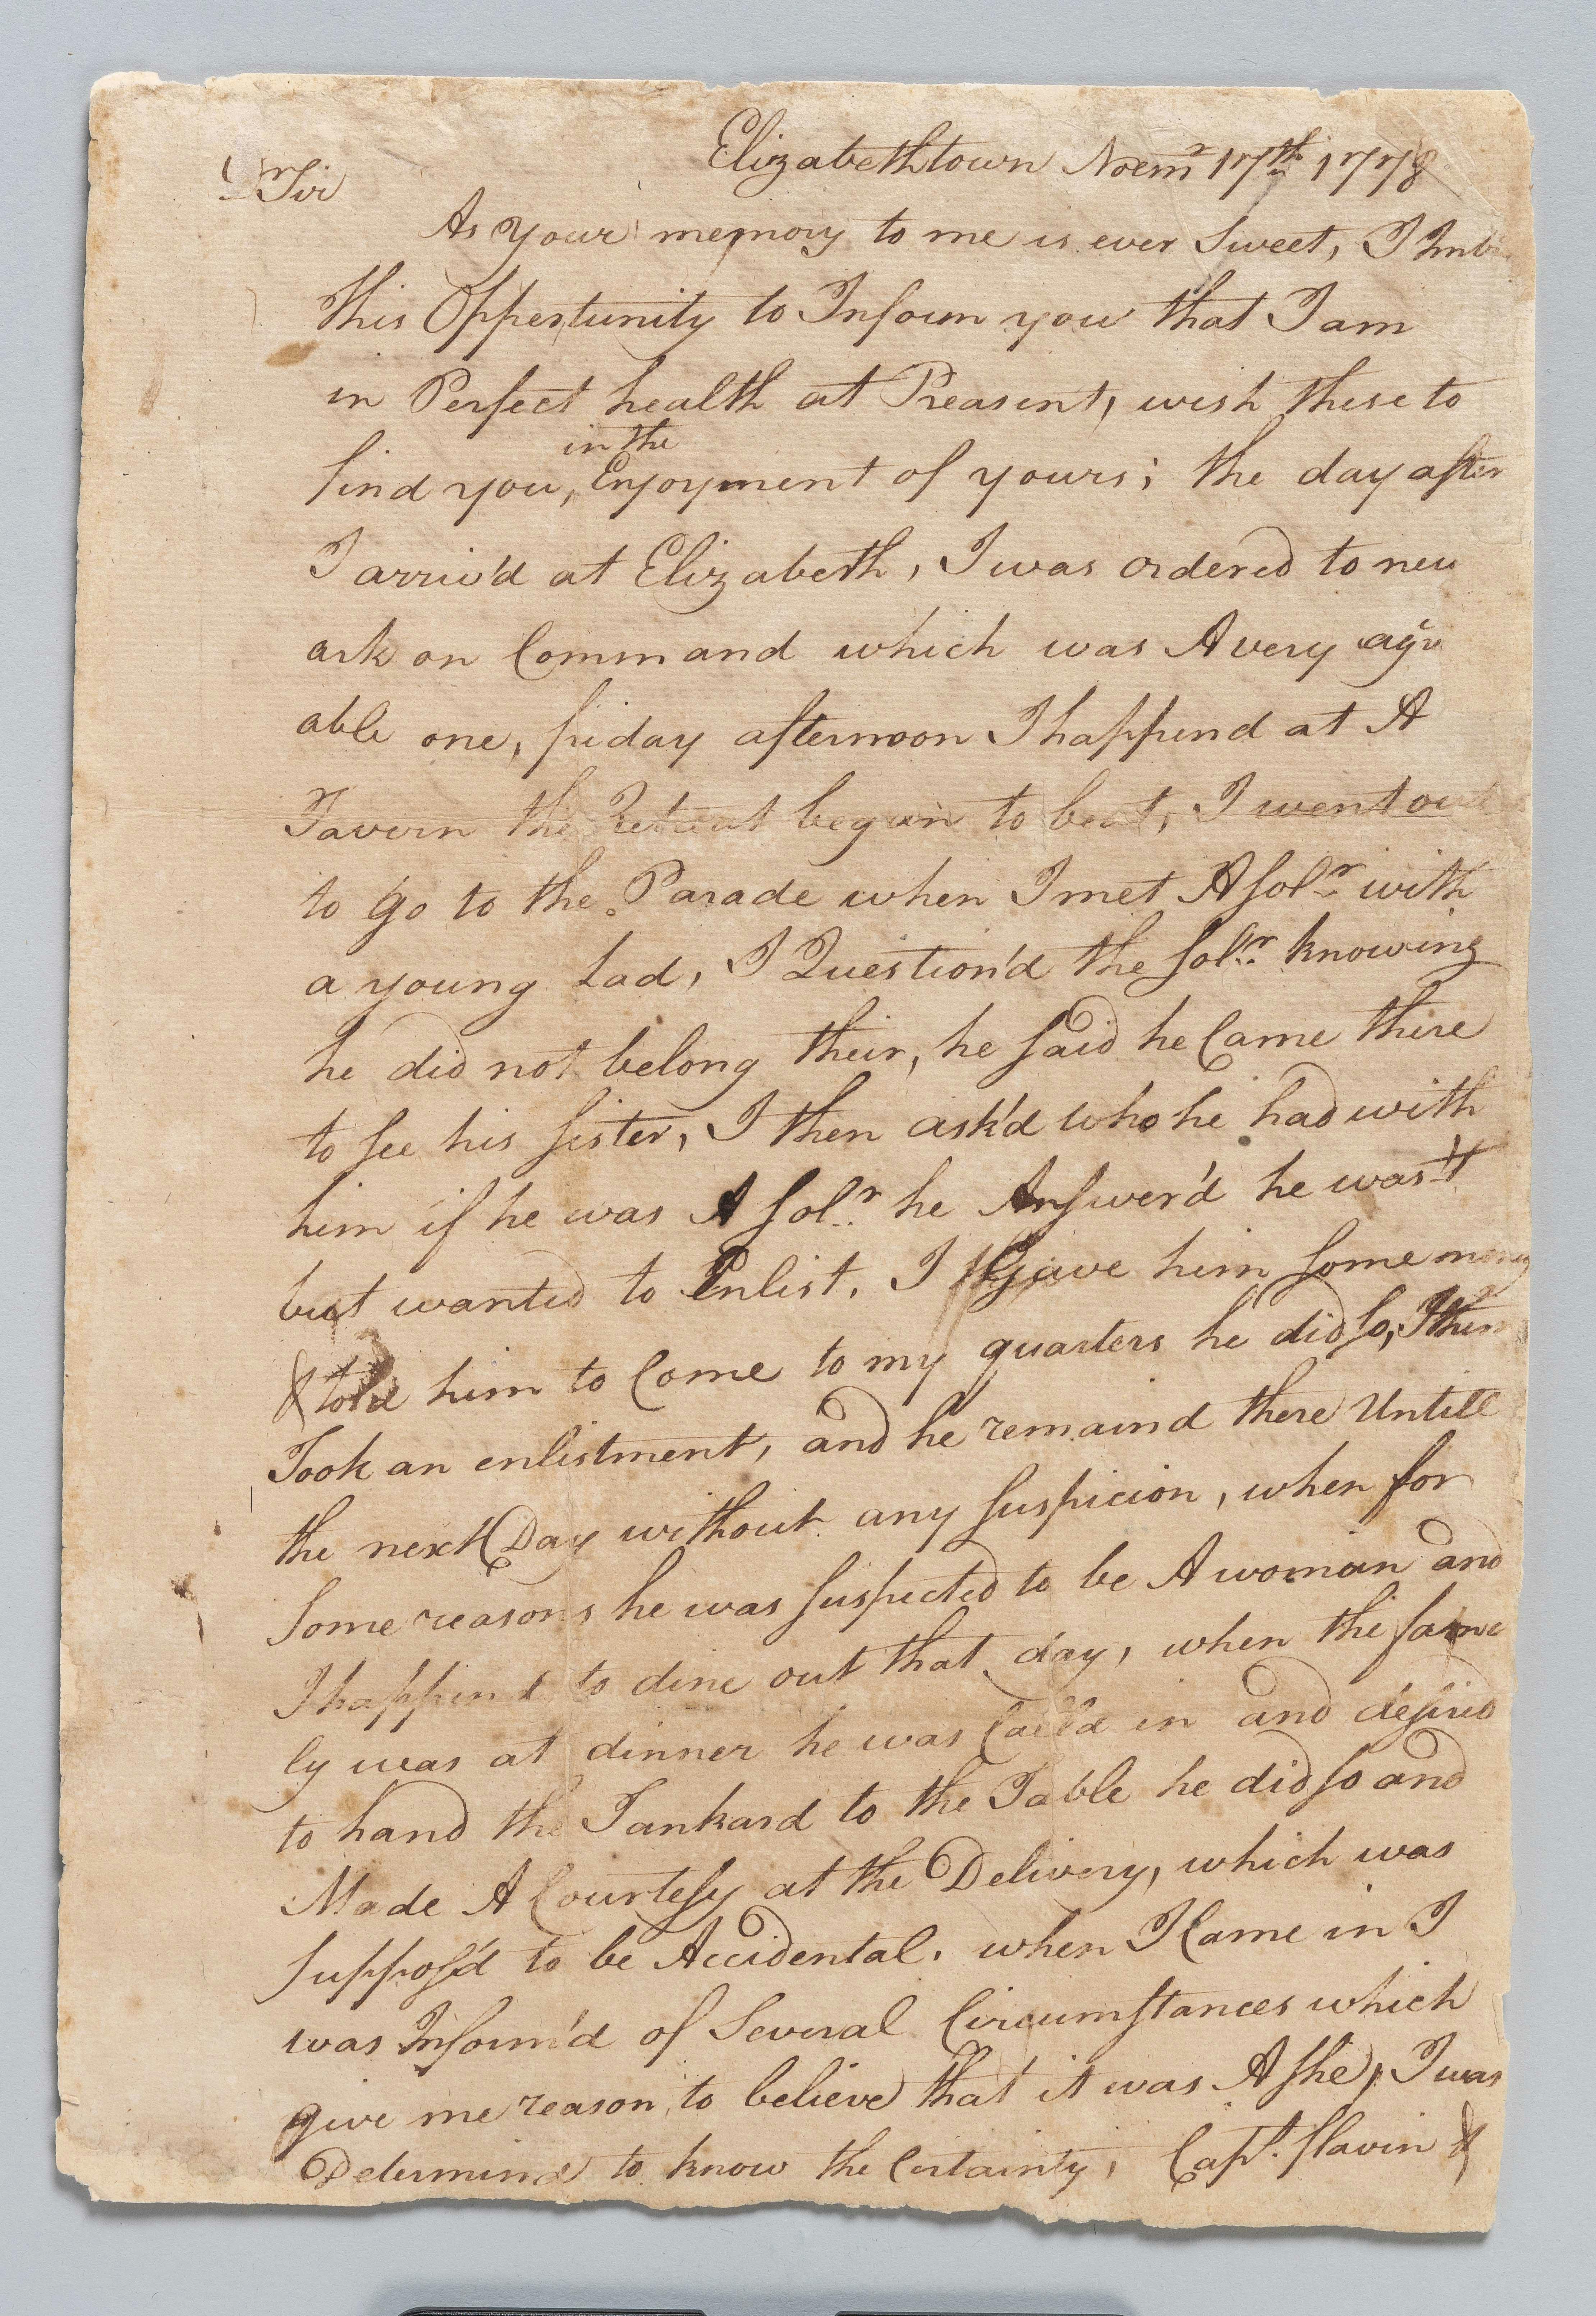 Letter by William Barton on female soldier discovery in Elizabethtown, NJ.